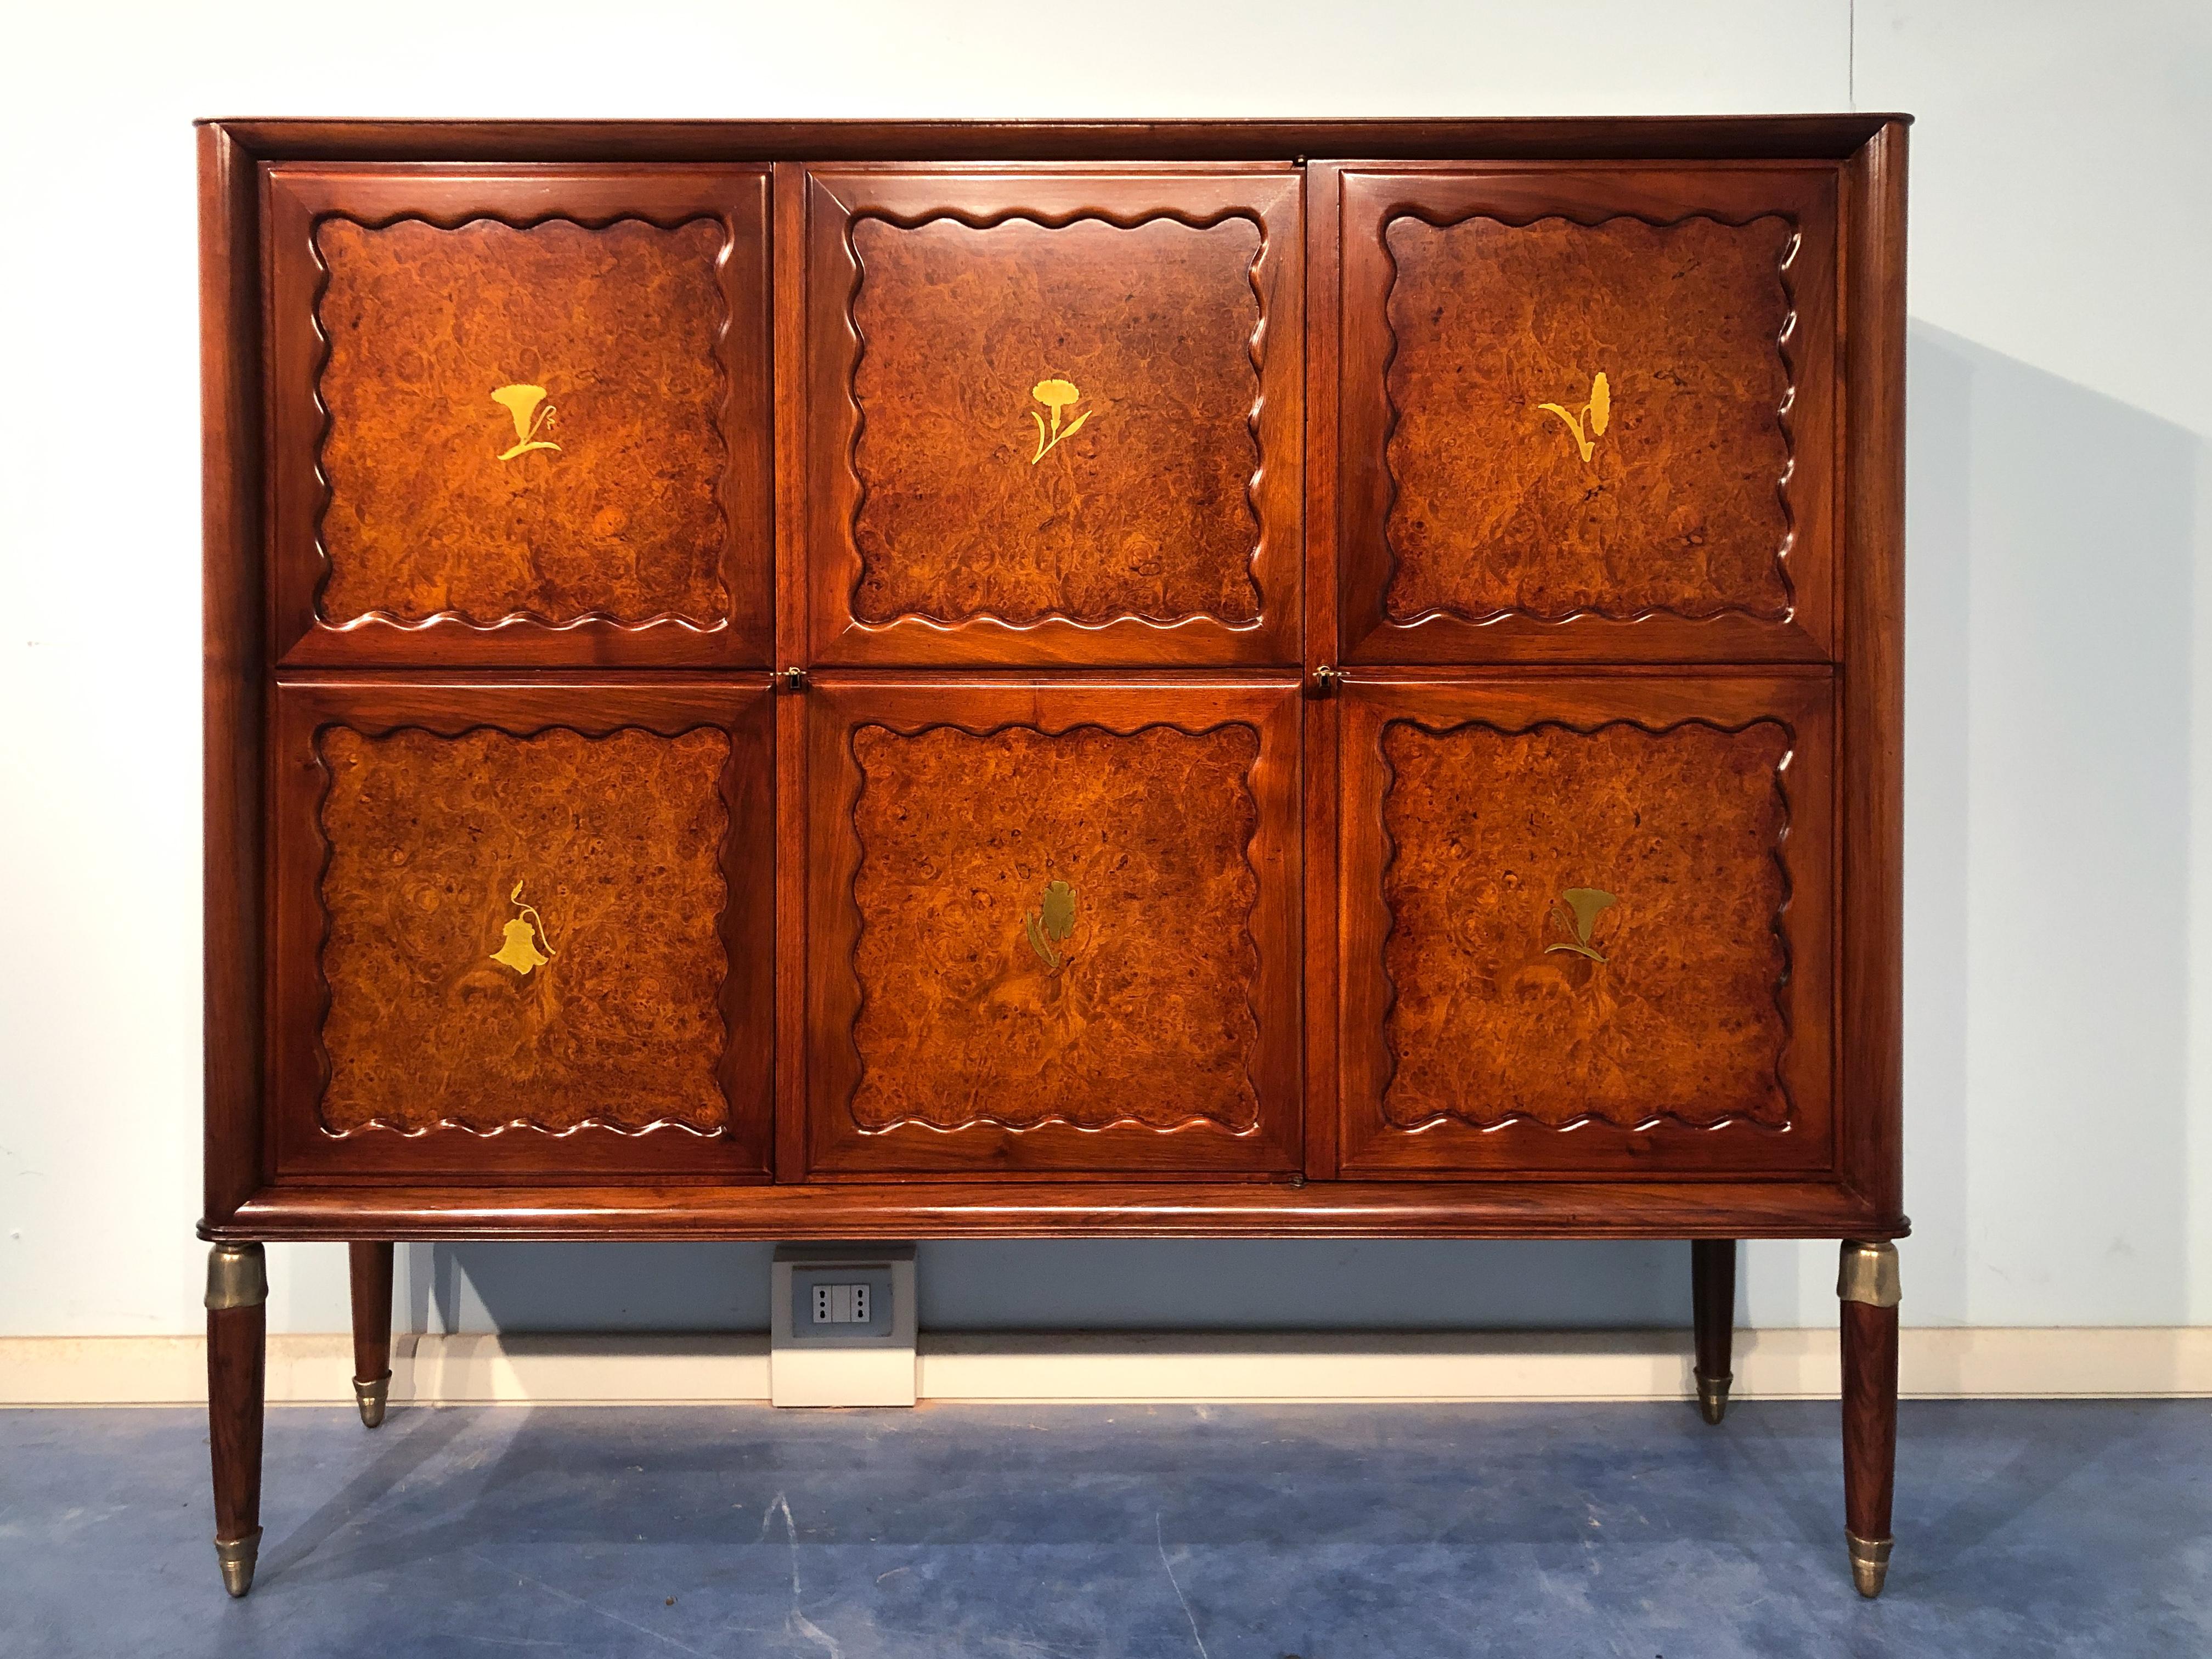 Beautiful Italian mid-century bar cabinet but could be used as high sideboard too, by Paolo Buffa, from the 1950s. The top is made of precious green Alps marble. The door's design is really refined, adorned with stylized brass flower motifs. Notable